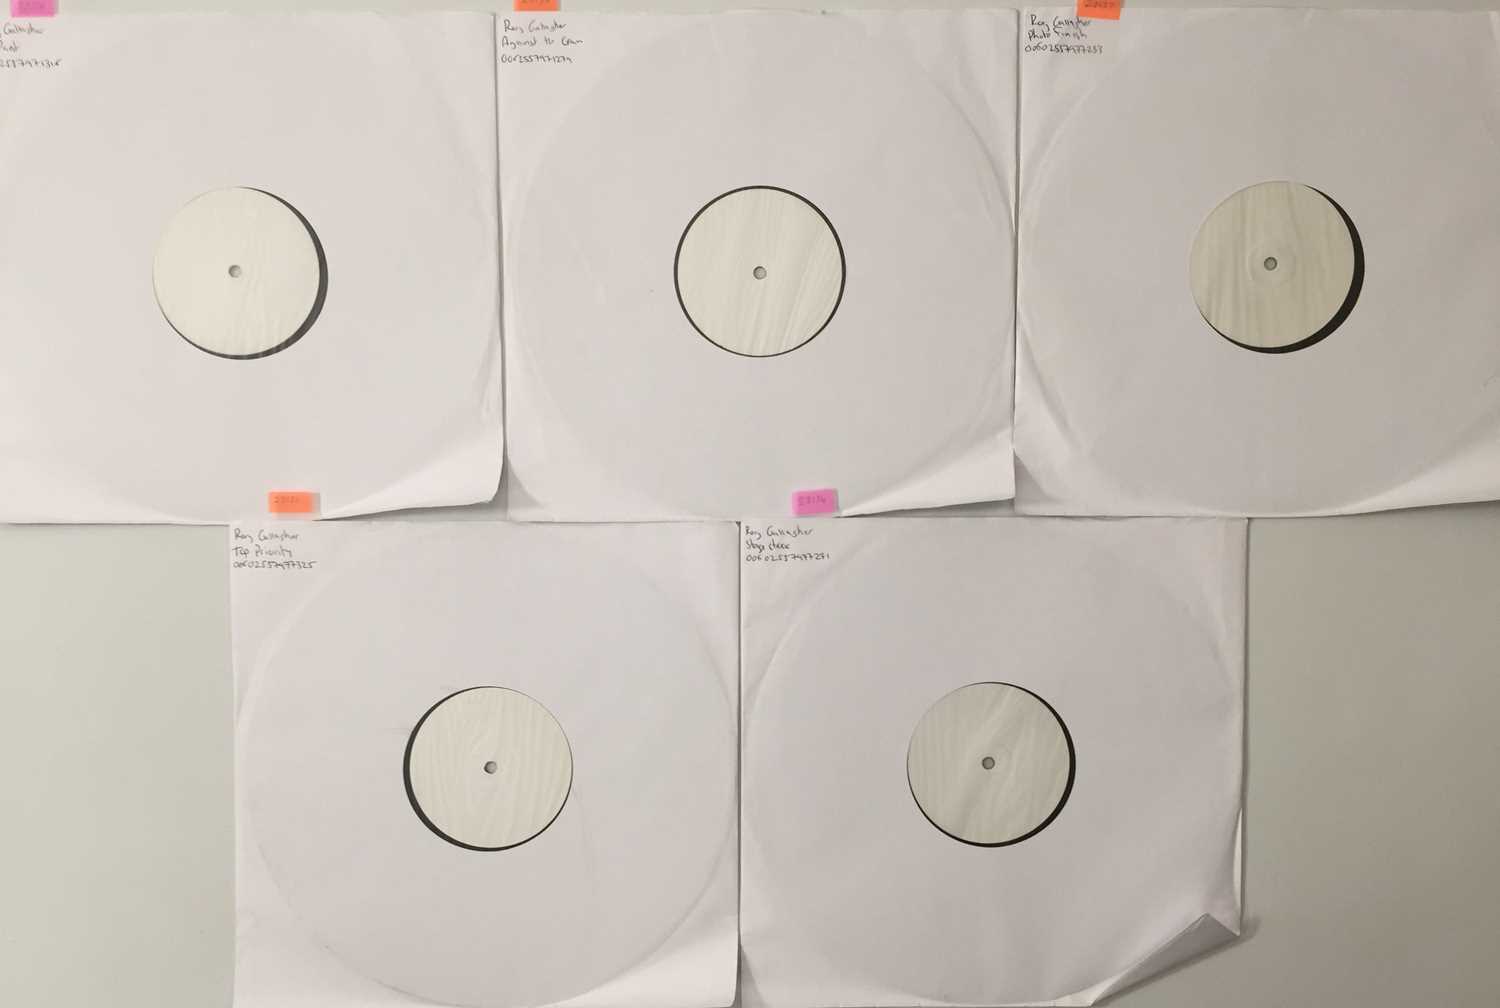 Lot 9 - RORY GALLAGHER - 2018 WHITE LABEL TEST PRESSING LPs